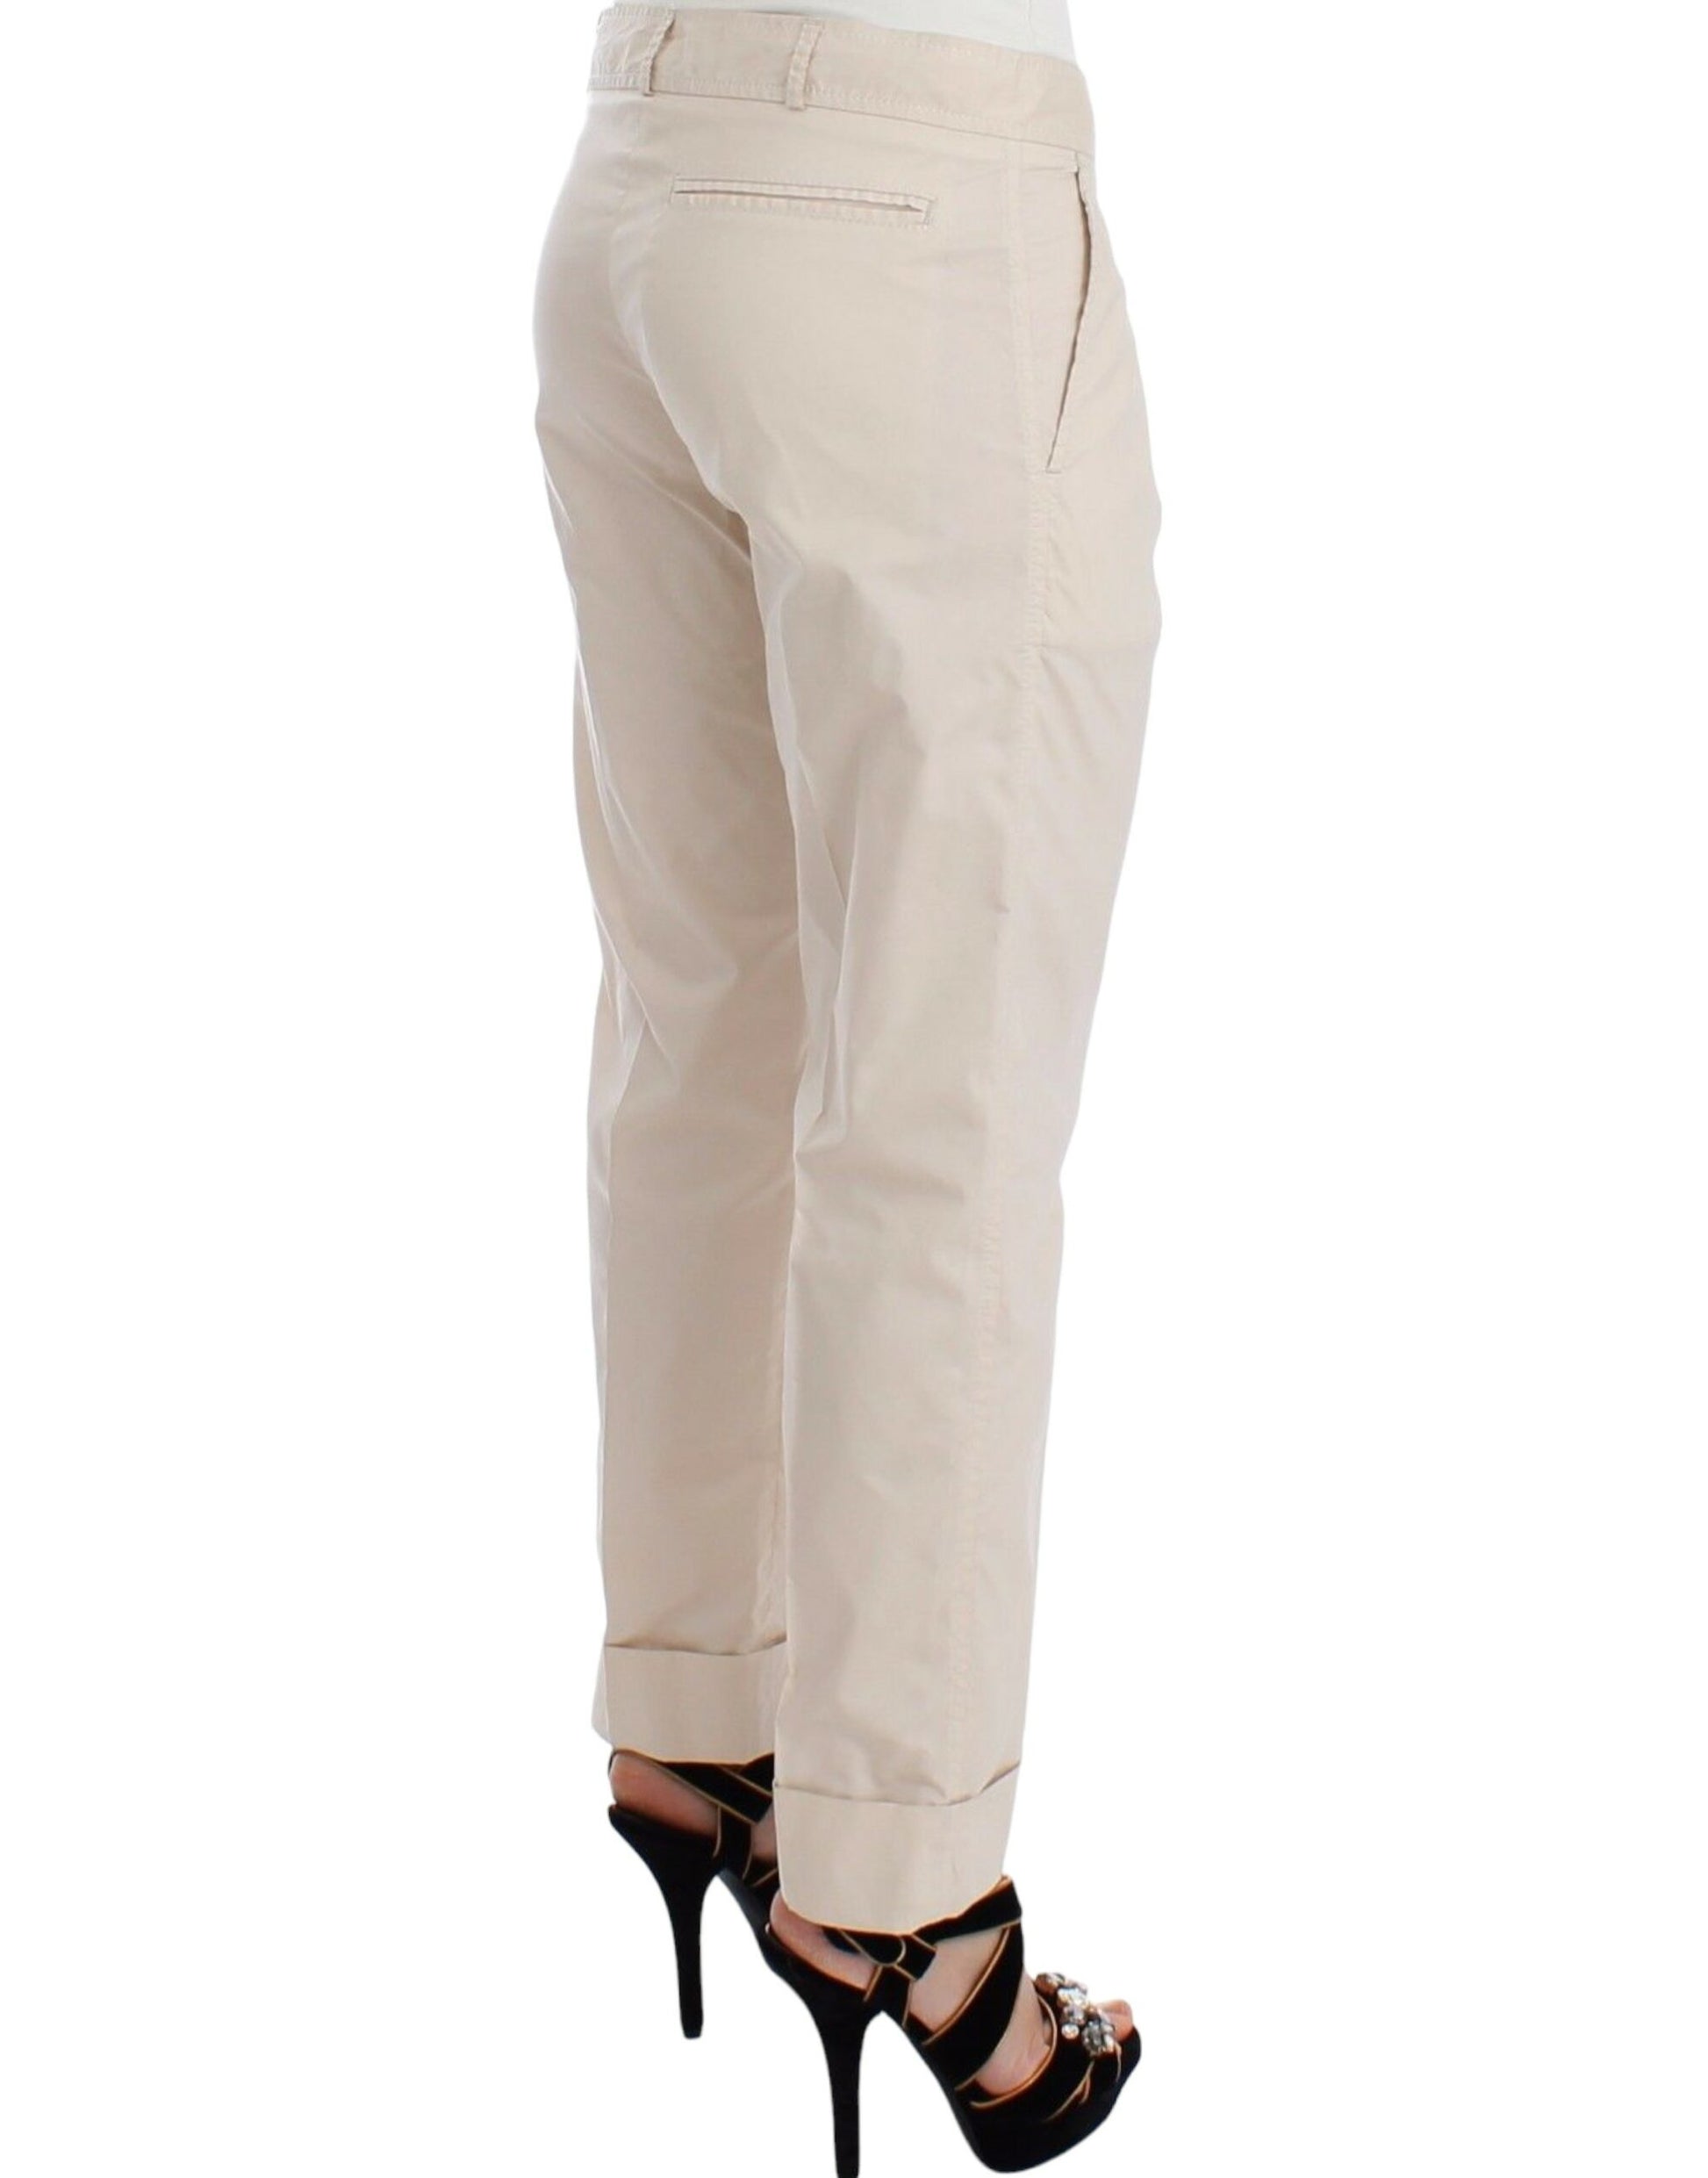 Chic Beige Chino Pants - Elegance Redefined